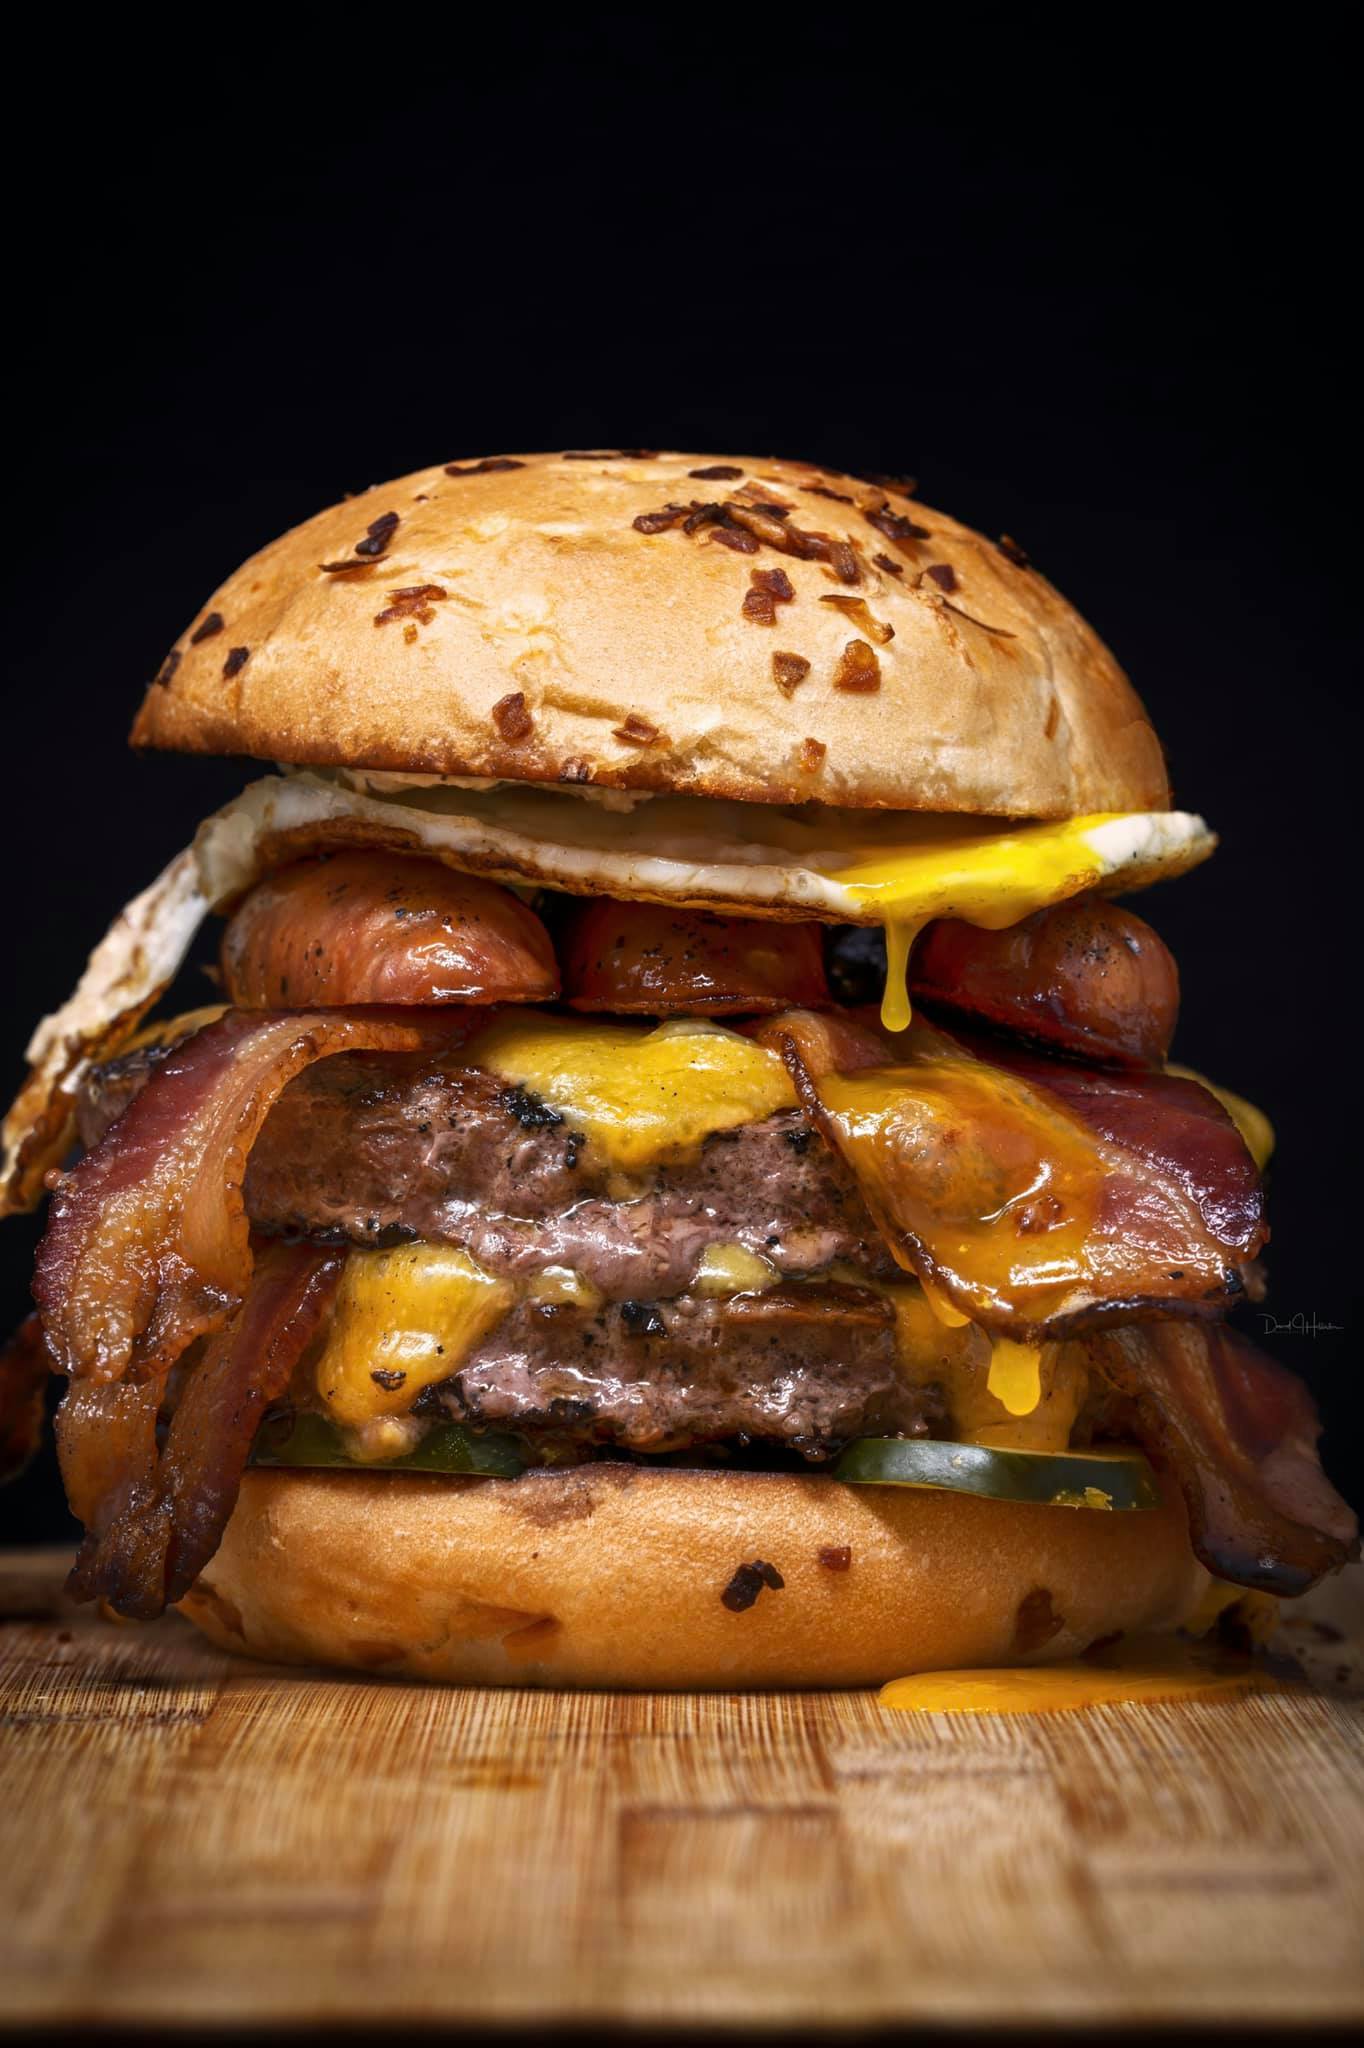 Pricey 2-foot long burger tops list of food offerings at Texas